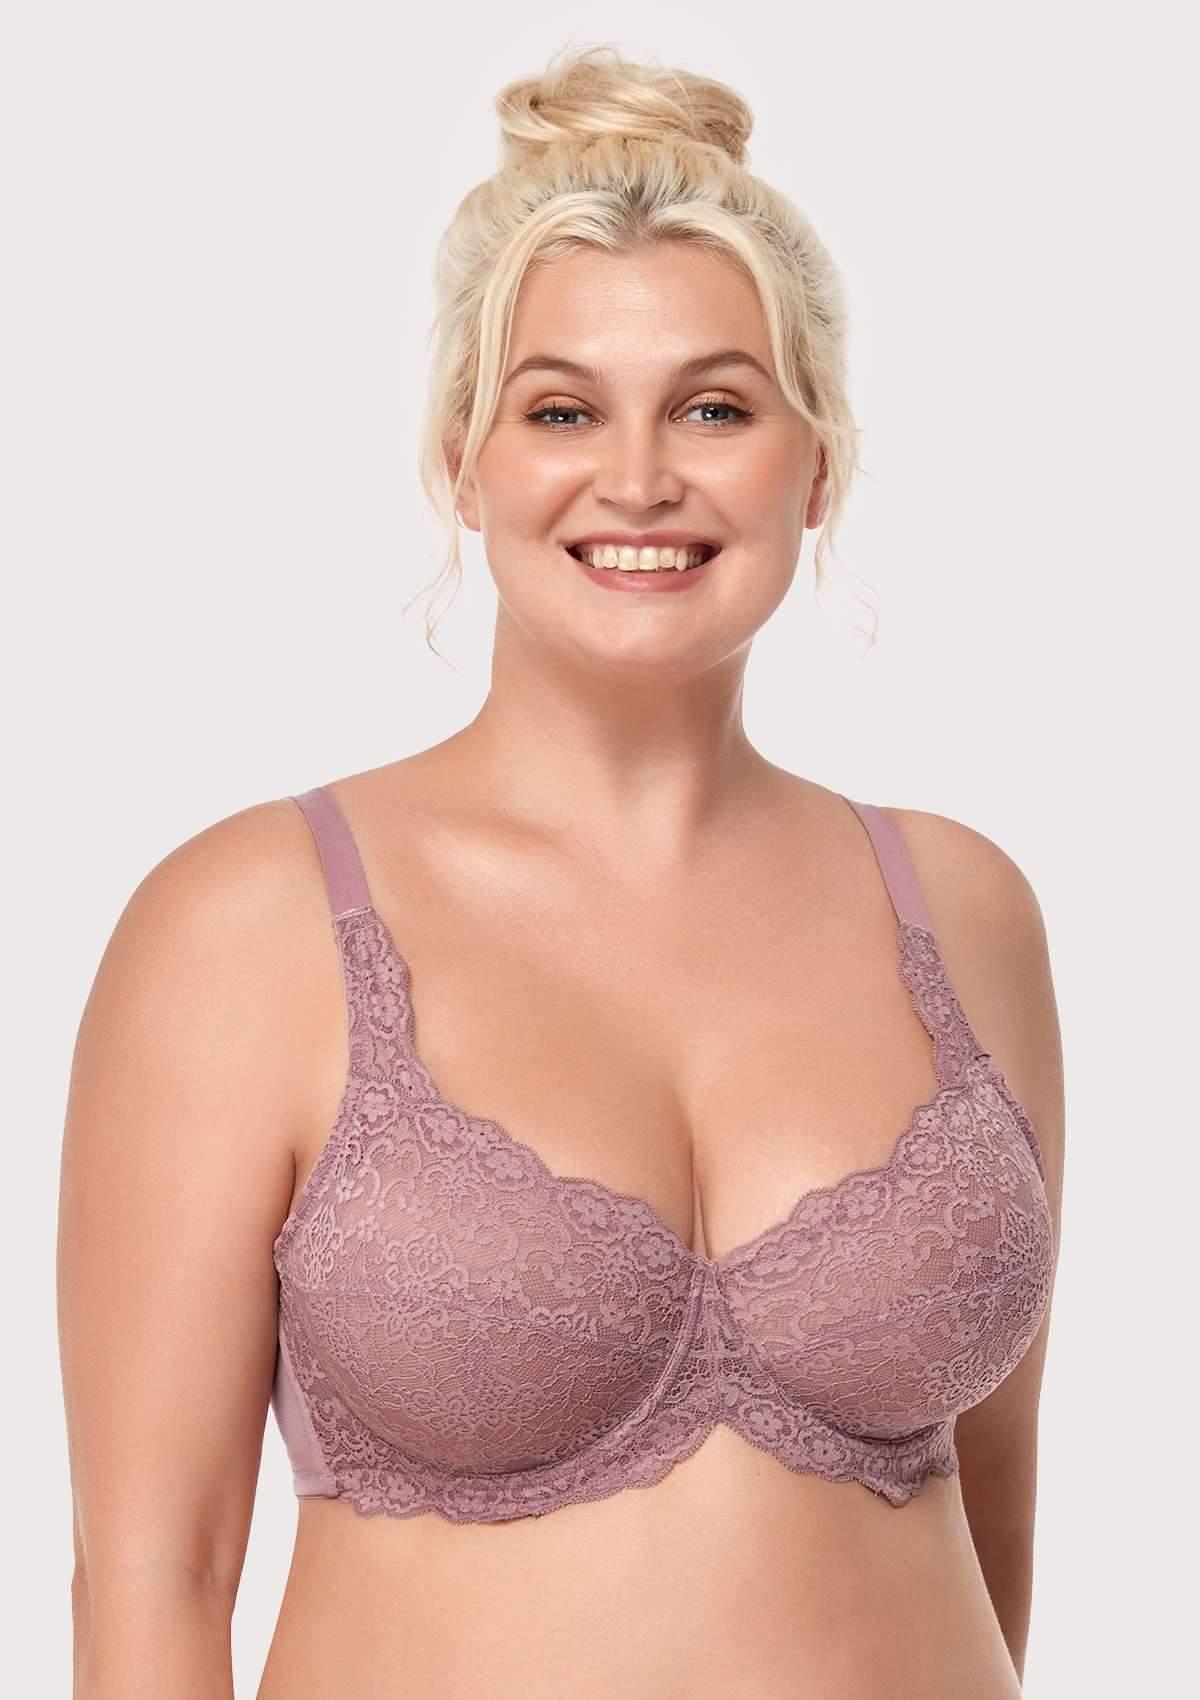 HSIA All-Over Floral Lace Unlined Bra: Minimizer Bra For Heavy Breasts - Purple / 42 / C